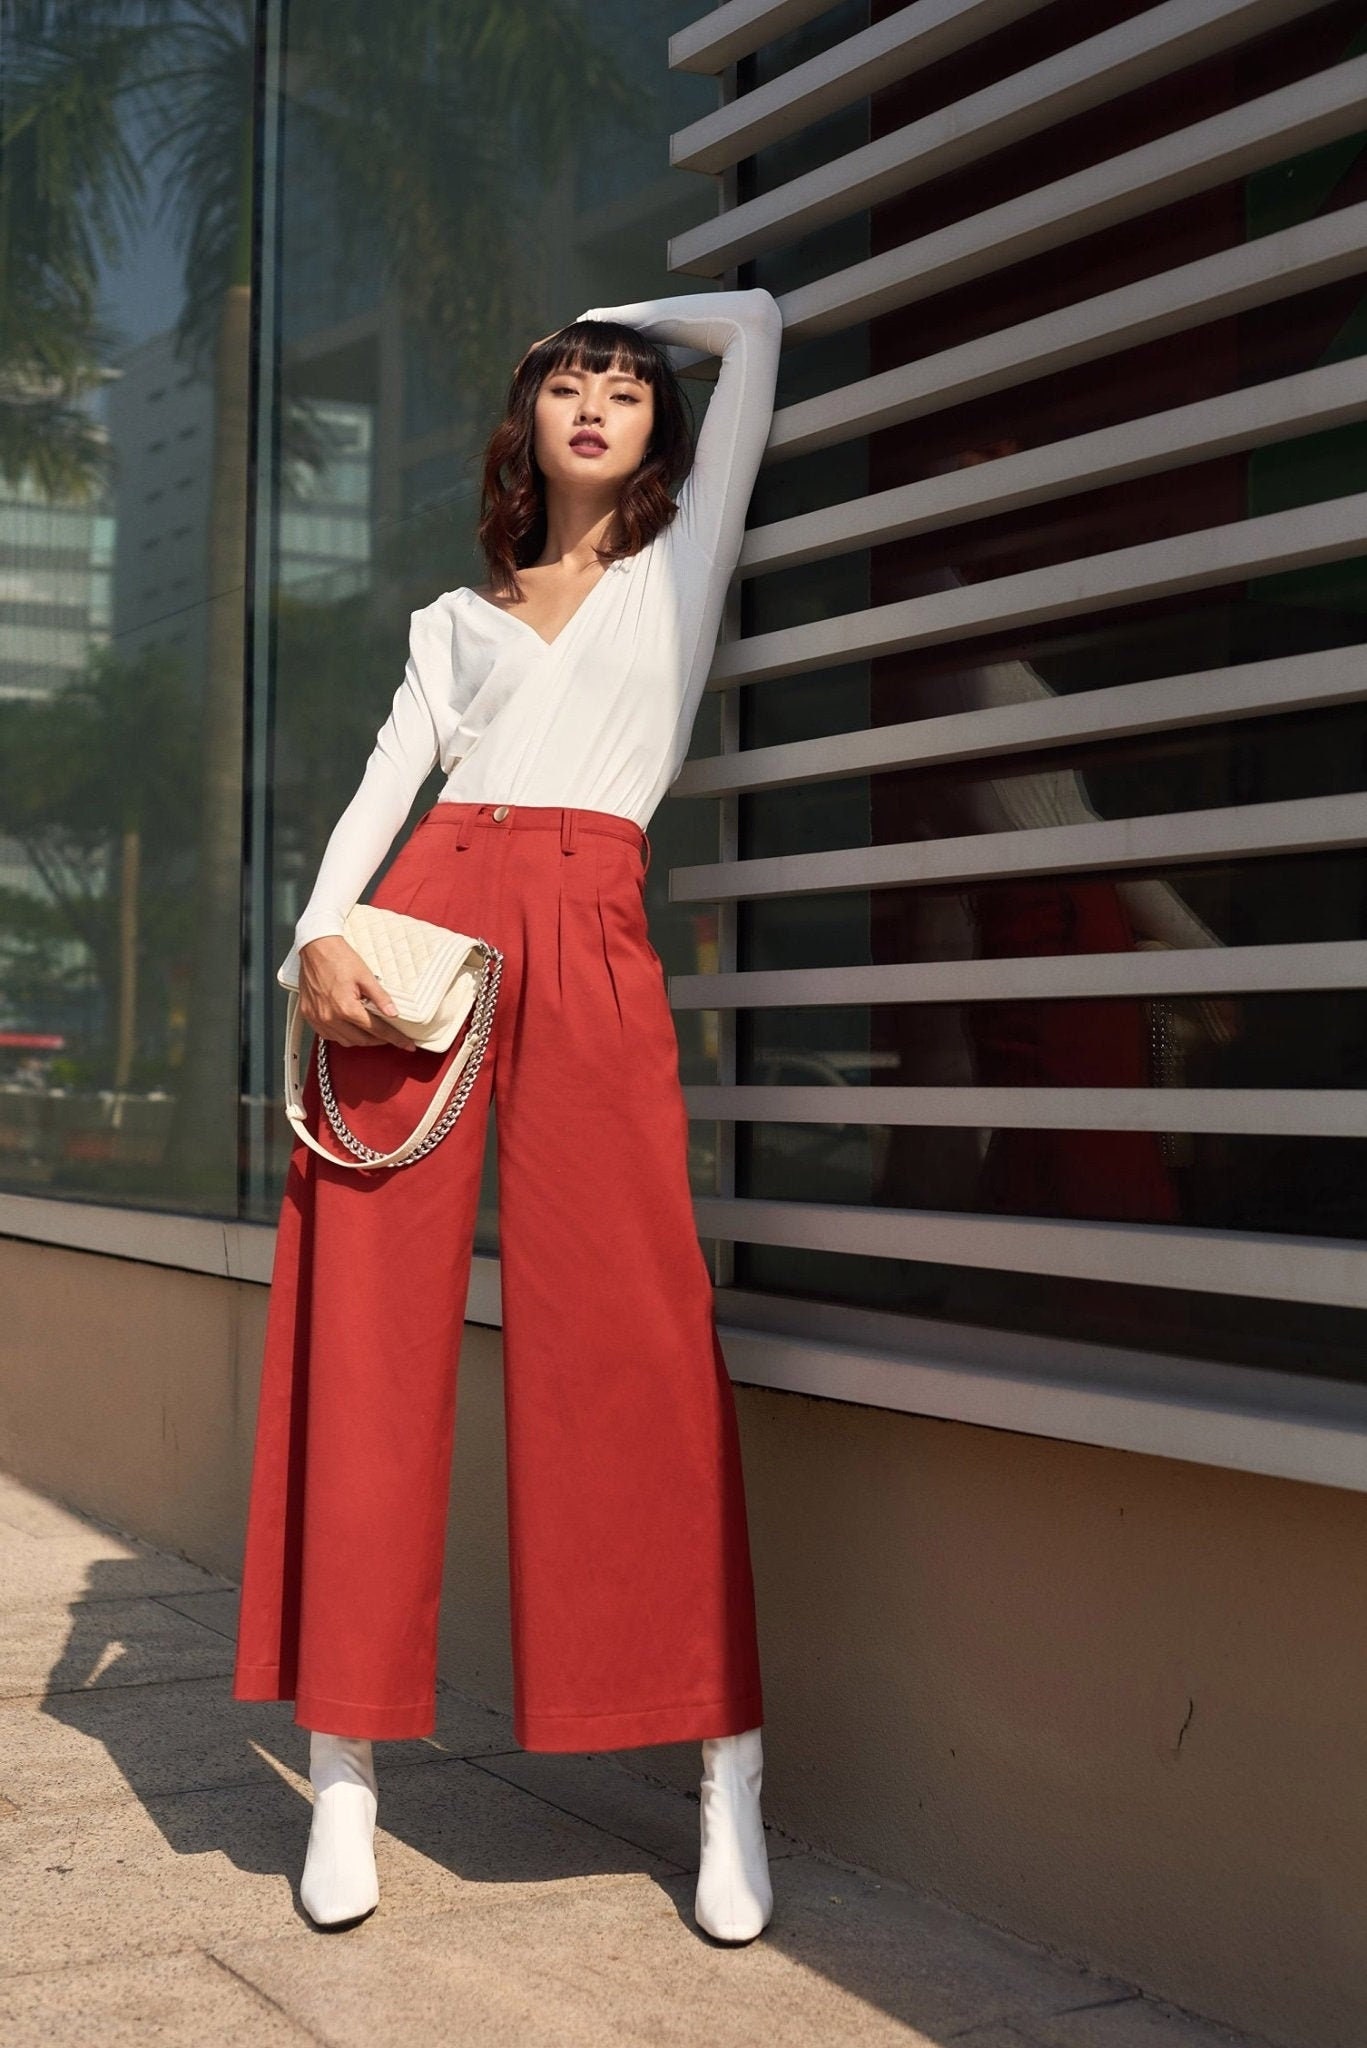 Buy High Waist Trousers Wide Leg Pants Red Wide Leg Pants Online in India   Etsy